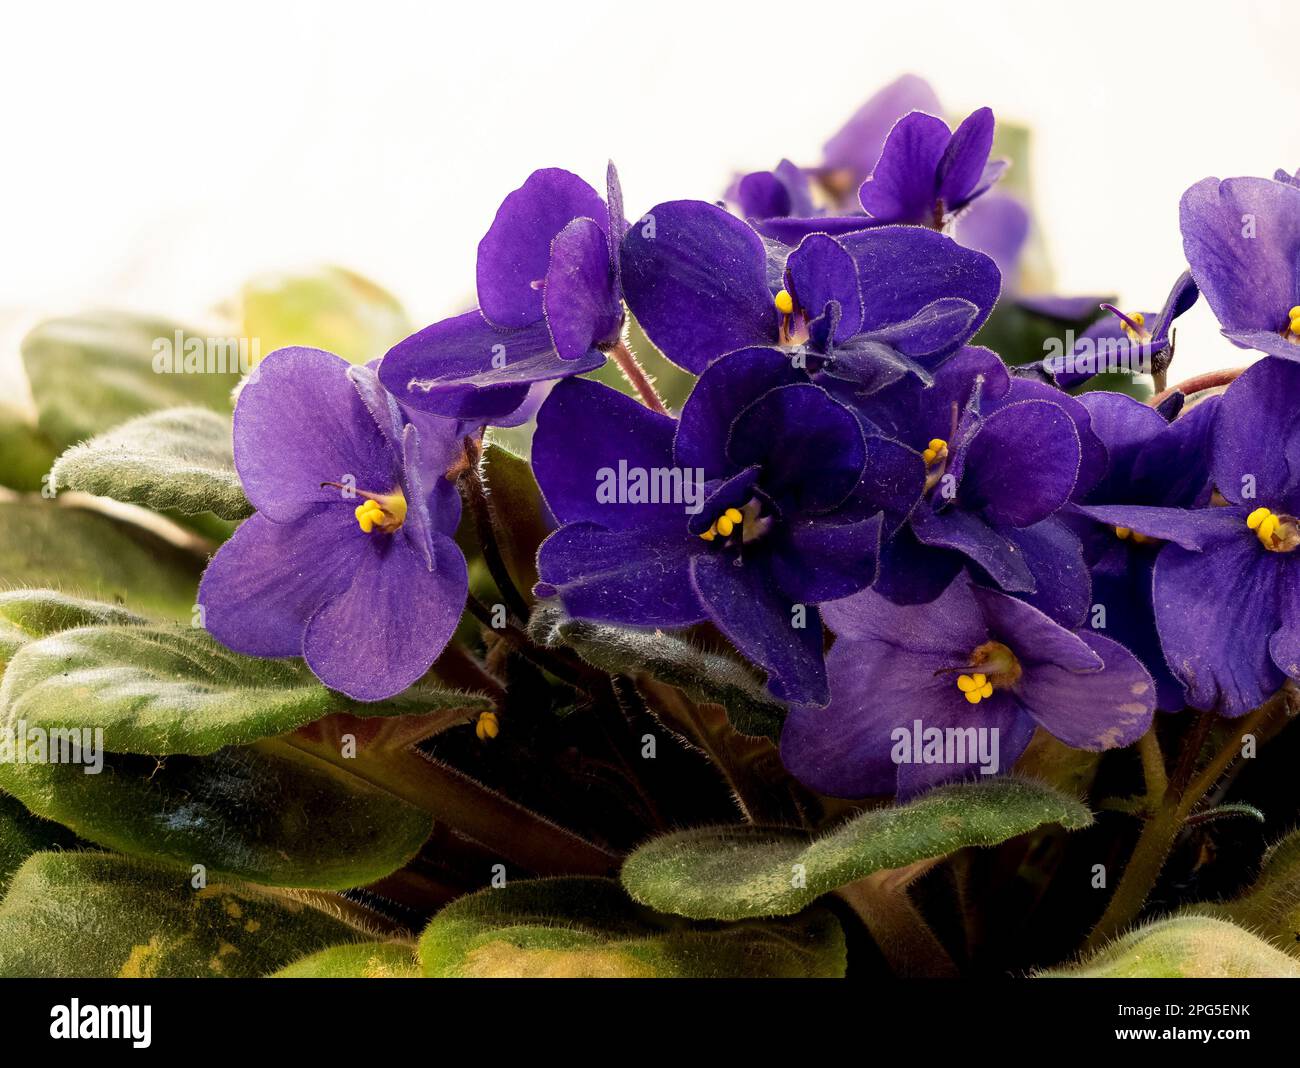 macro close up of an african violet (Saintpaulia) with blurred background Stock Photo